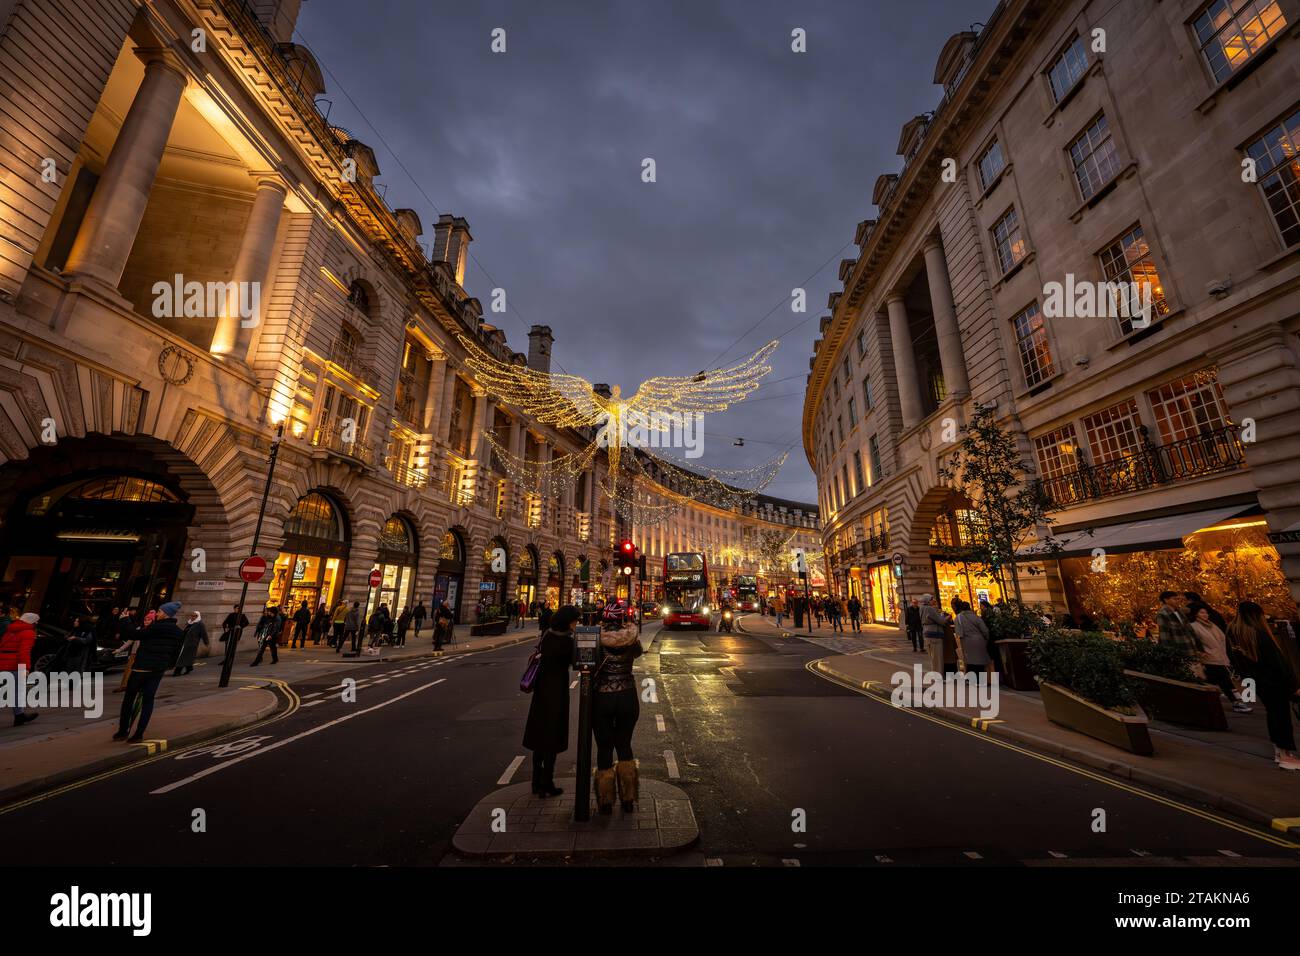 London, UK - Nov 20 2023: Regent Street in central London with Christmas lights overhead. People stand in the middle of the road taking photographs. Stock Photo